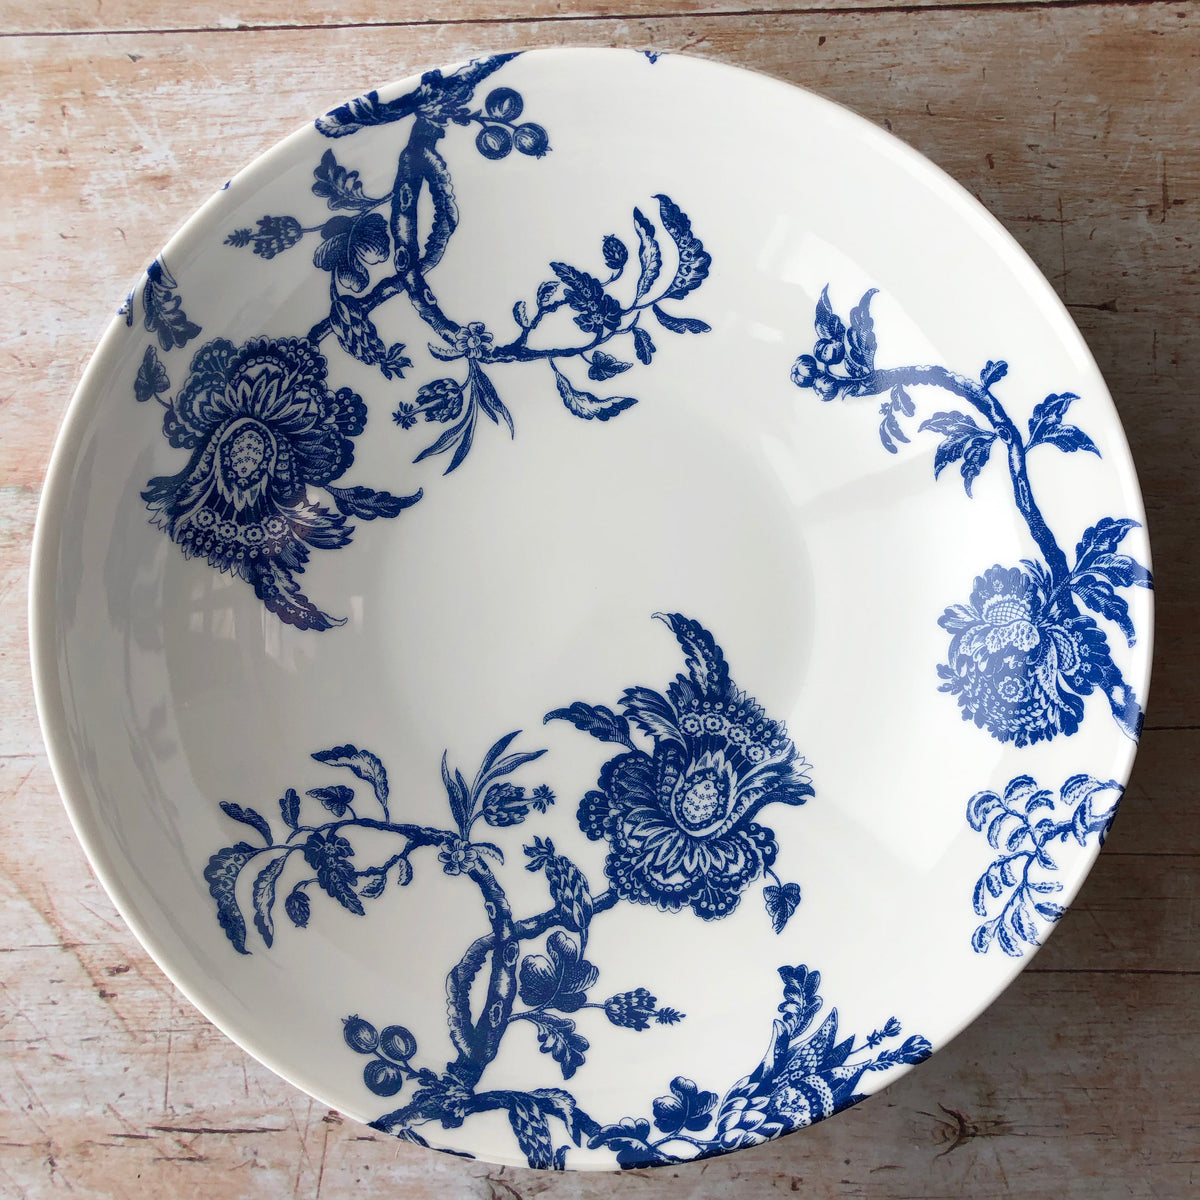 An Arcadia Wide Serving Bowl by Caskata Artisanal Home, featuring a blue and white floral design, placed on a wooden table with dimensions.